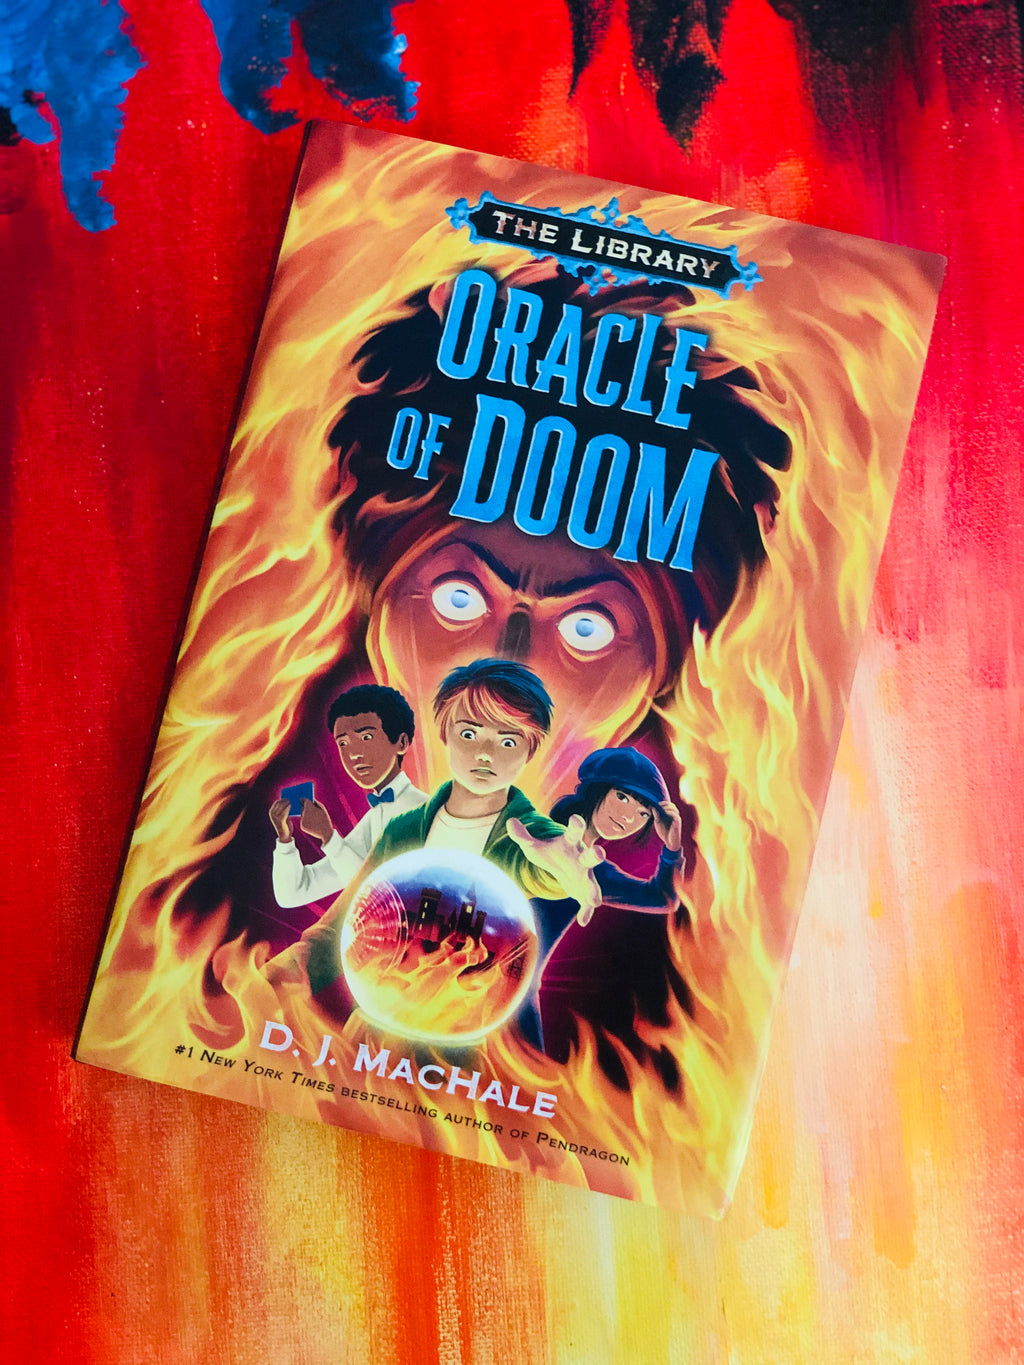 The Library: Oracle of Doom- By D.J. Machale